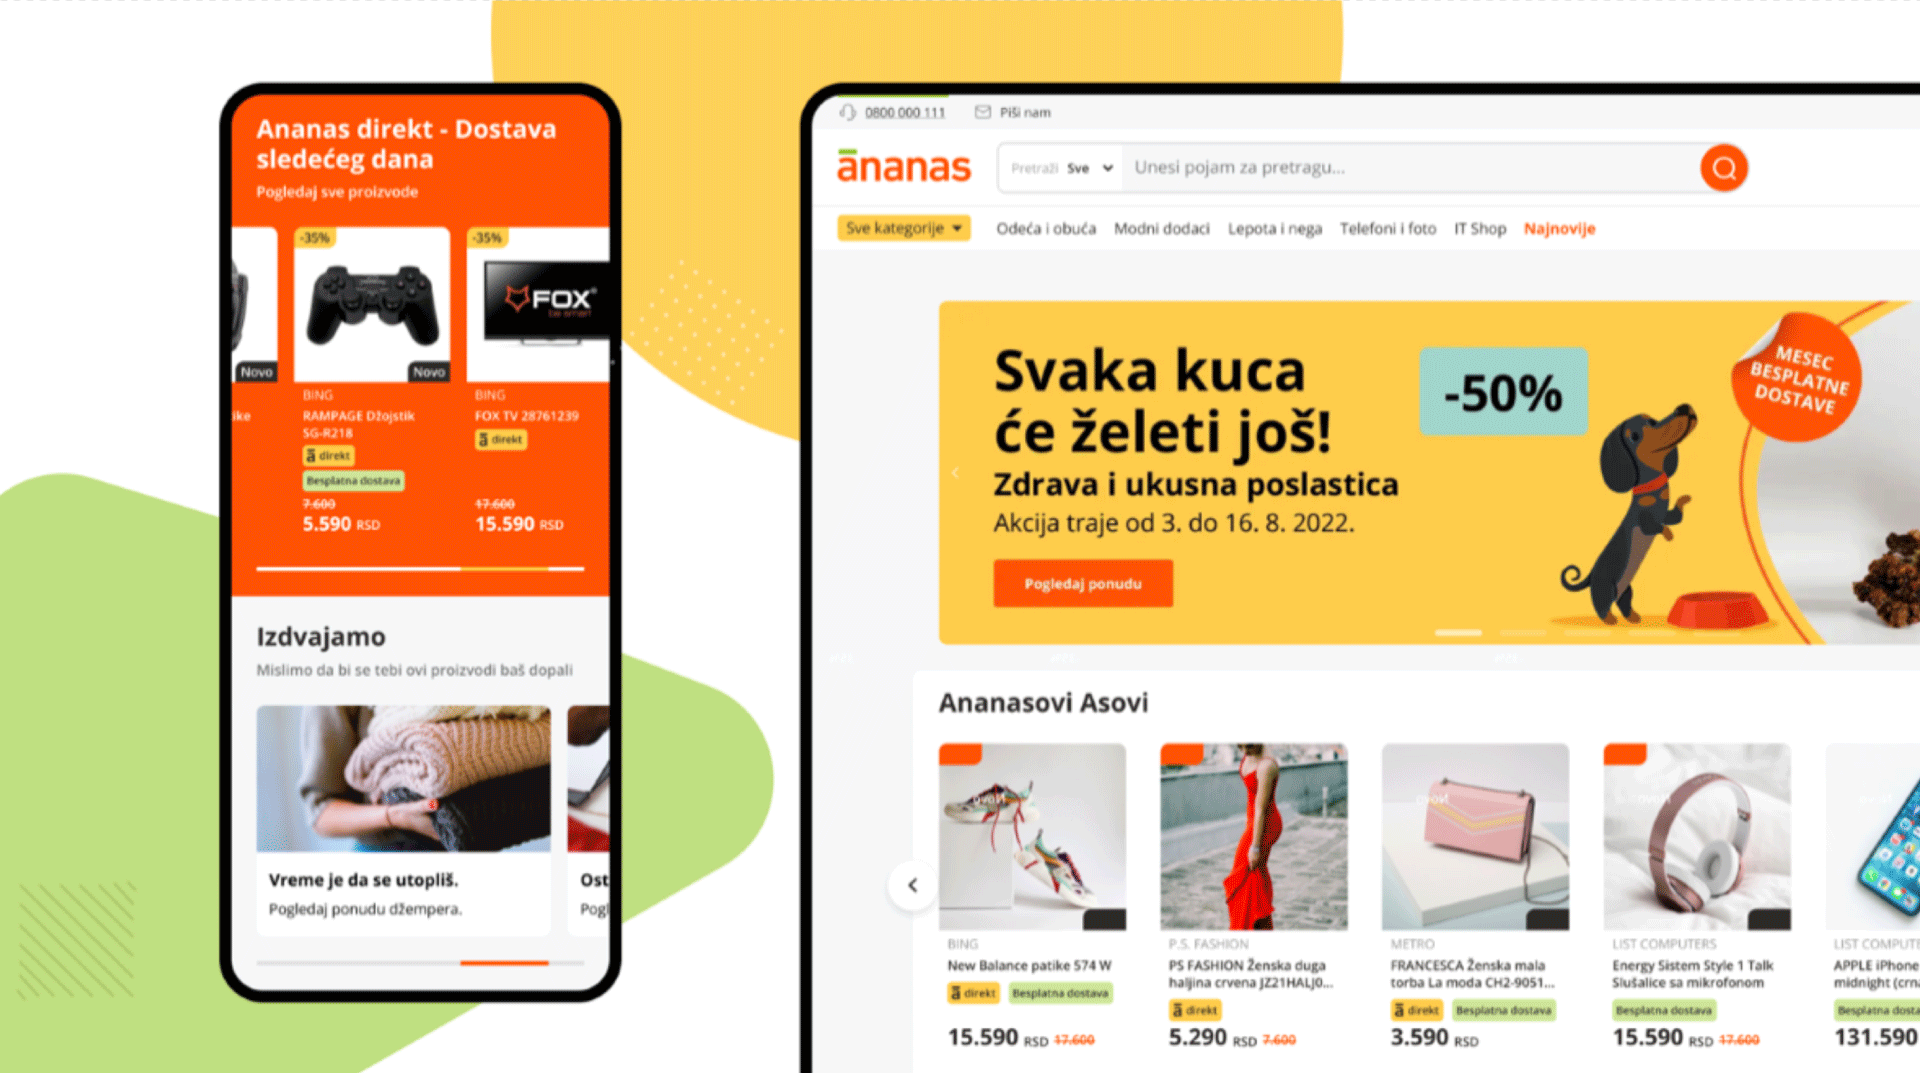 HTEC Group and Ananas: Building the Largest eCommerce Platform in the Region from the Ground Up 